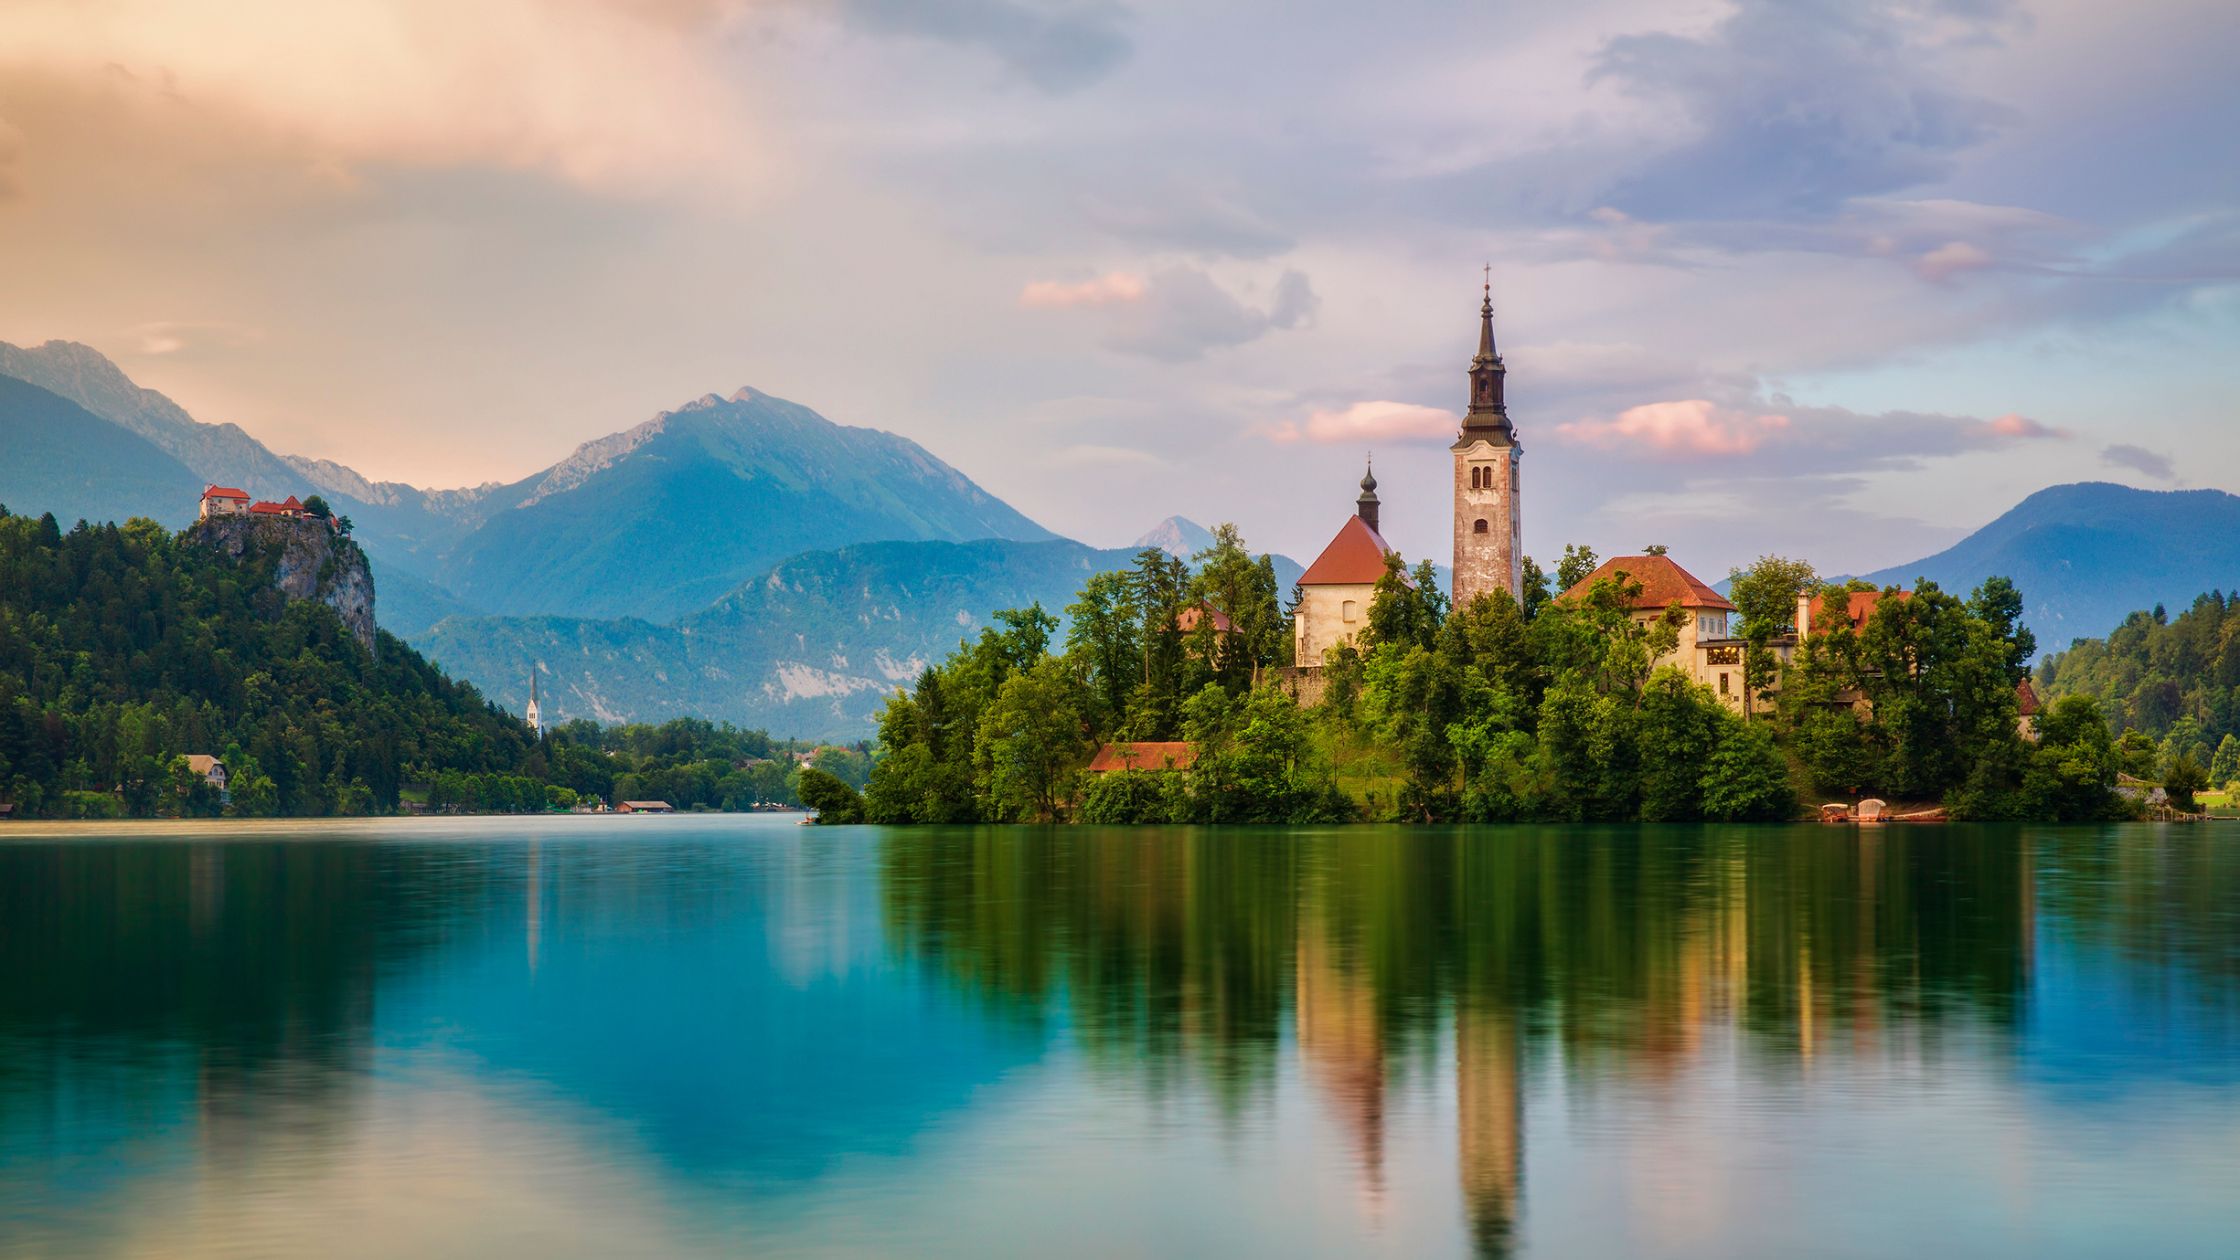 The most picturesque spot in Slovenia